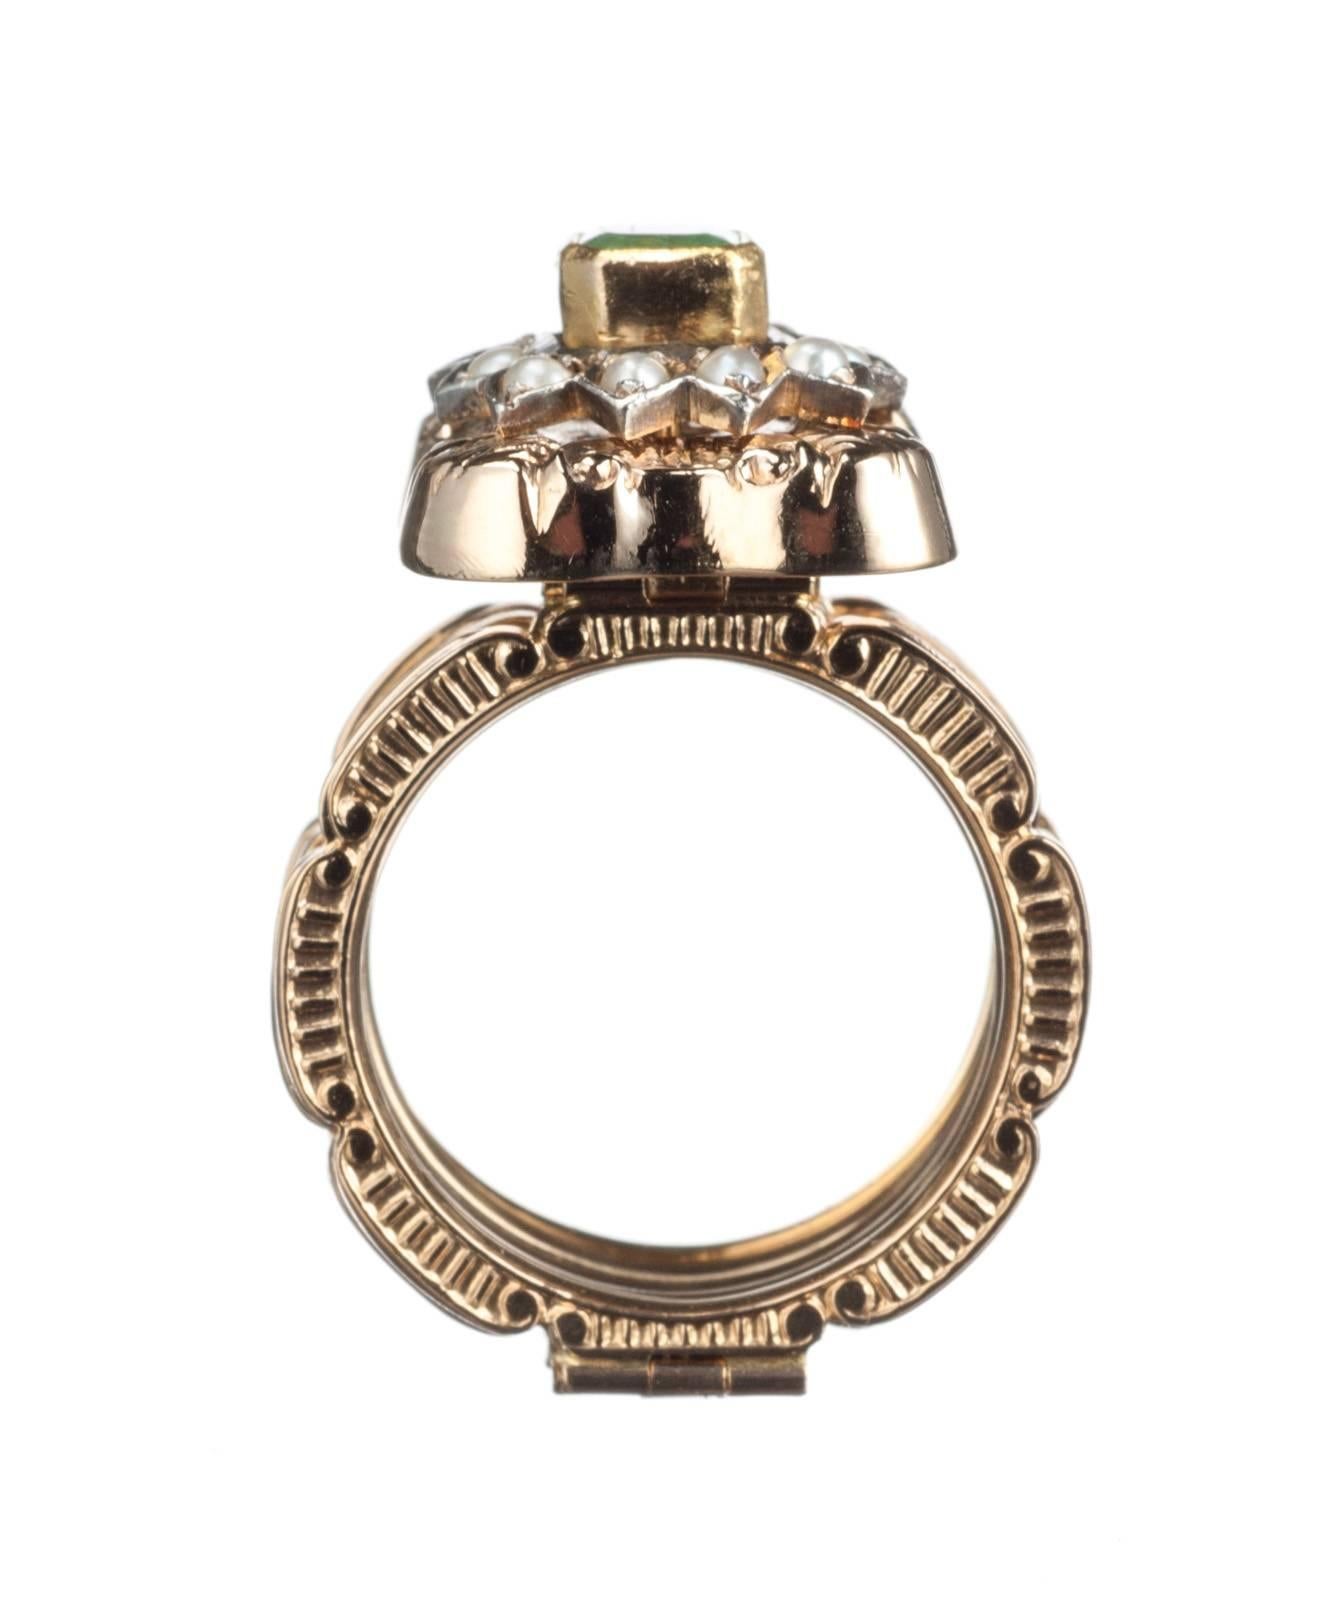 This ring has a secret: it is a bracelet too! Incredible craftsmanship in 18-karat yellow gold composes a series of eight articulated links that unfold to reveal a bracelet. Set with an emerald, approx. .65ct., and 12 freshwater cultured half